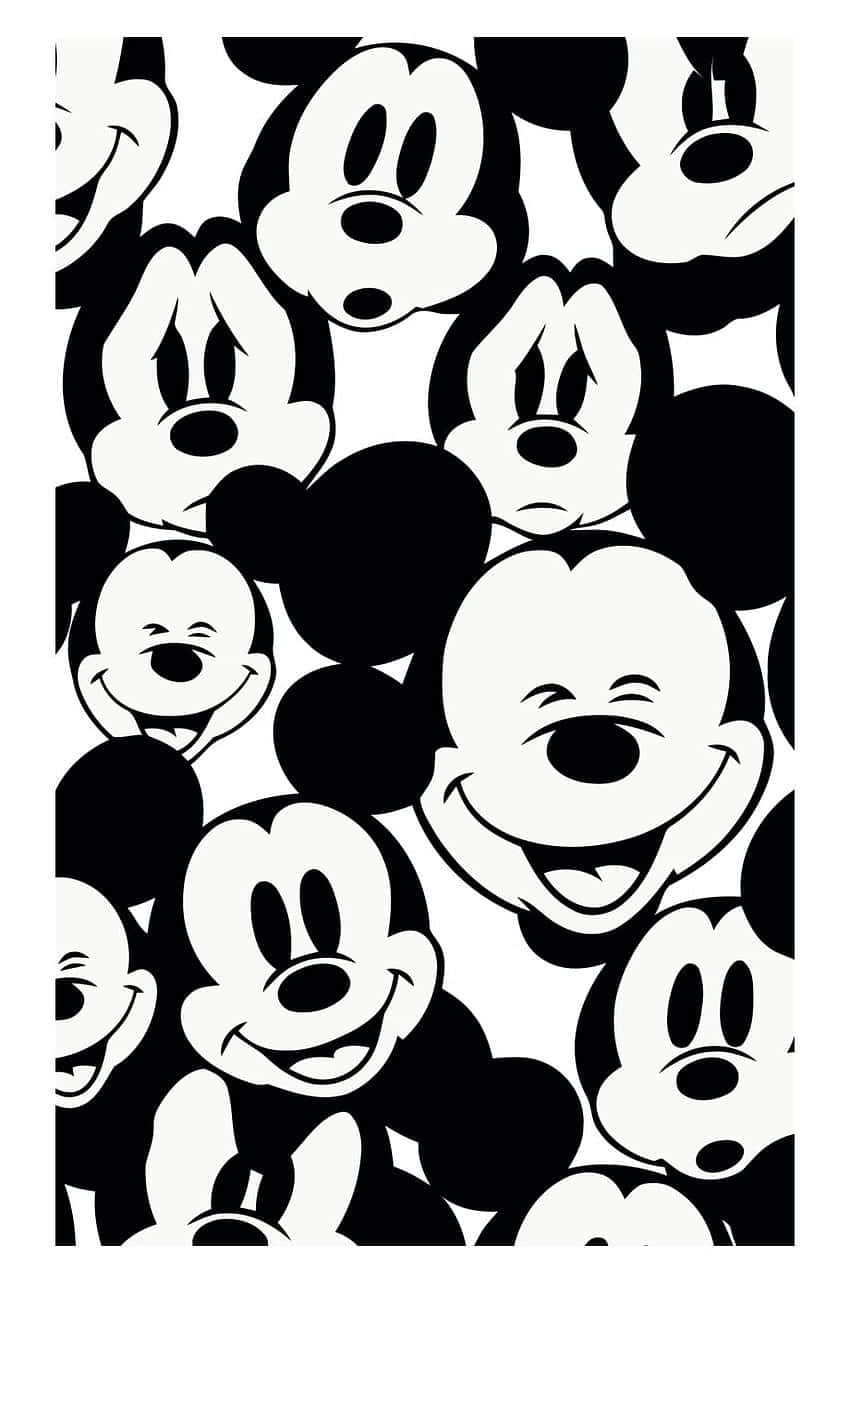 Mickey wallpaper  Mickey mouse wallpaper iphone Mickey mouse wallpaper  Cute disney wallpaper